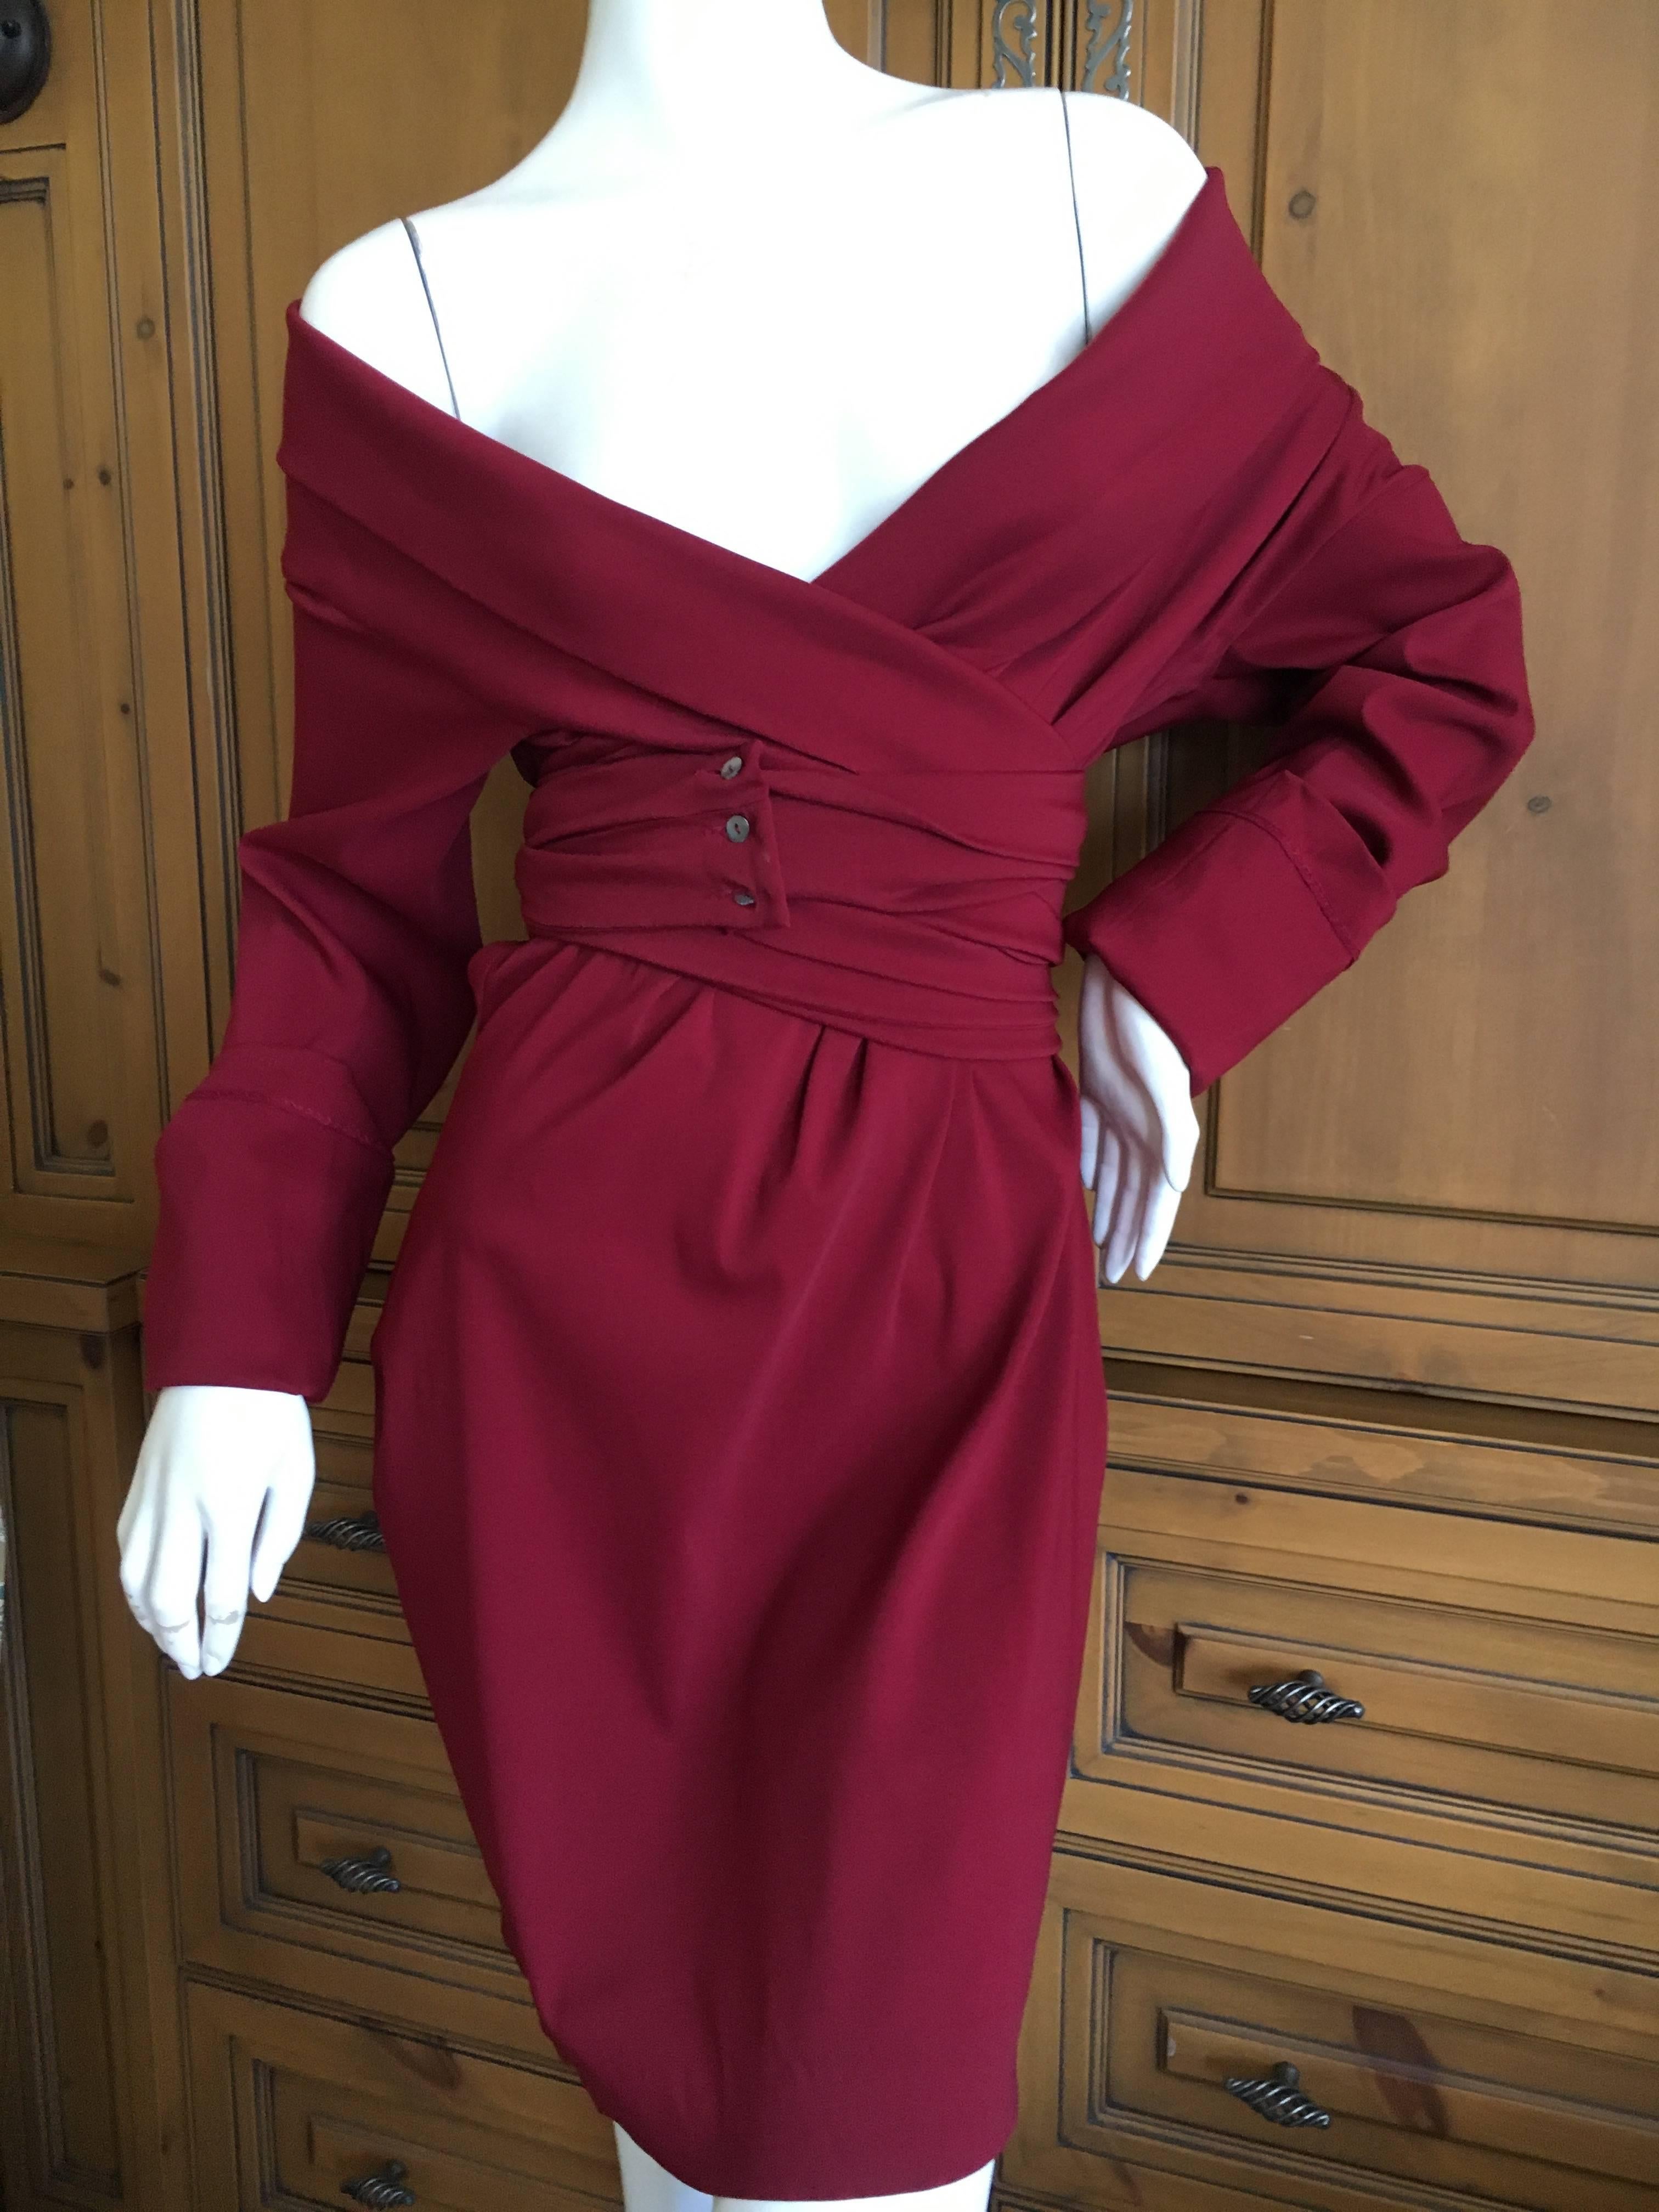 Romantic red wrap dress by Romeo Gigli for Bergdorf Goodman circa 1986.
Long ties wrap a few times around the body and buttons in the front. 
One of the thin shell buttons is broken.
Size 40
Bust 40